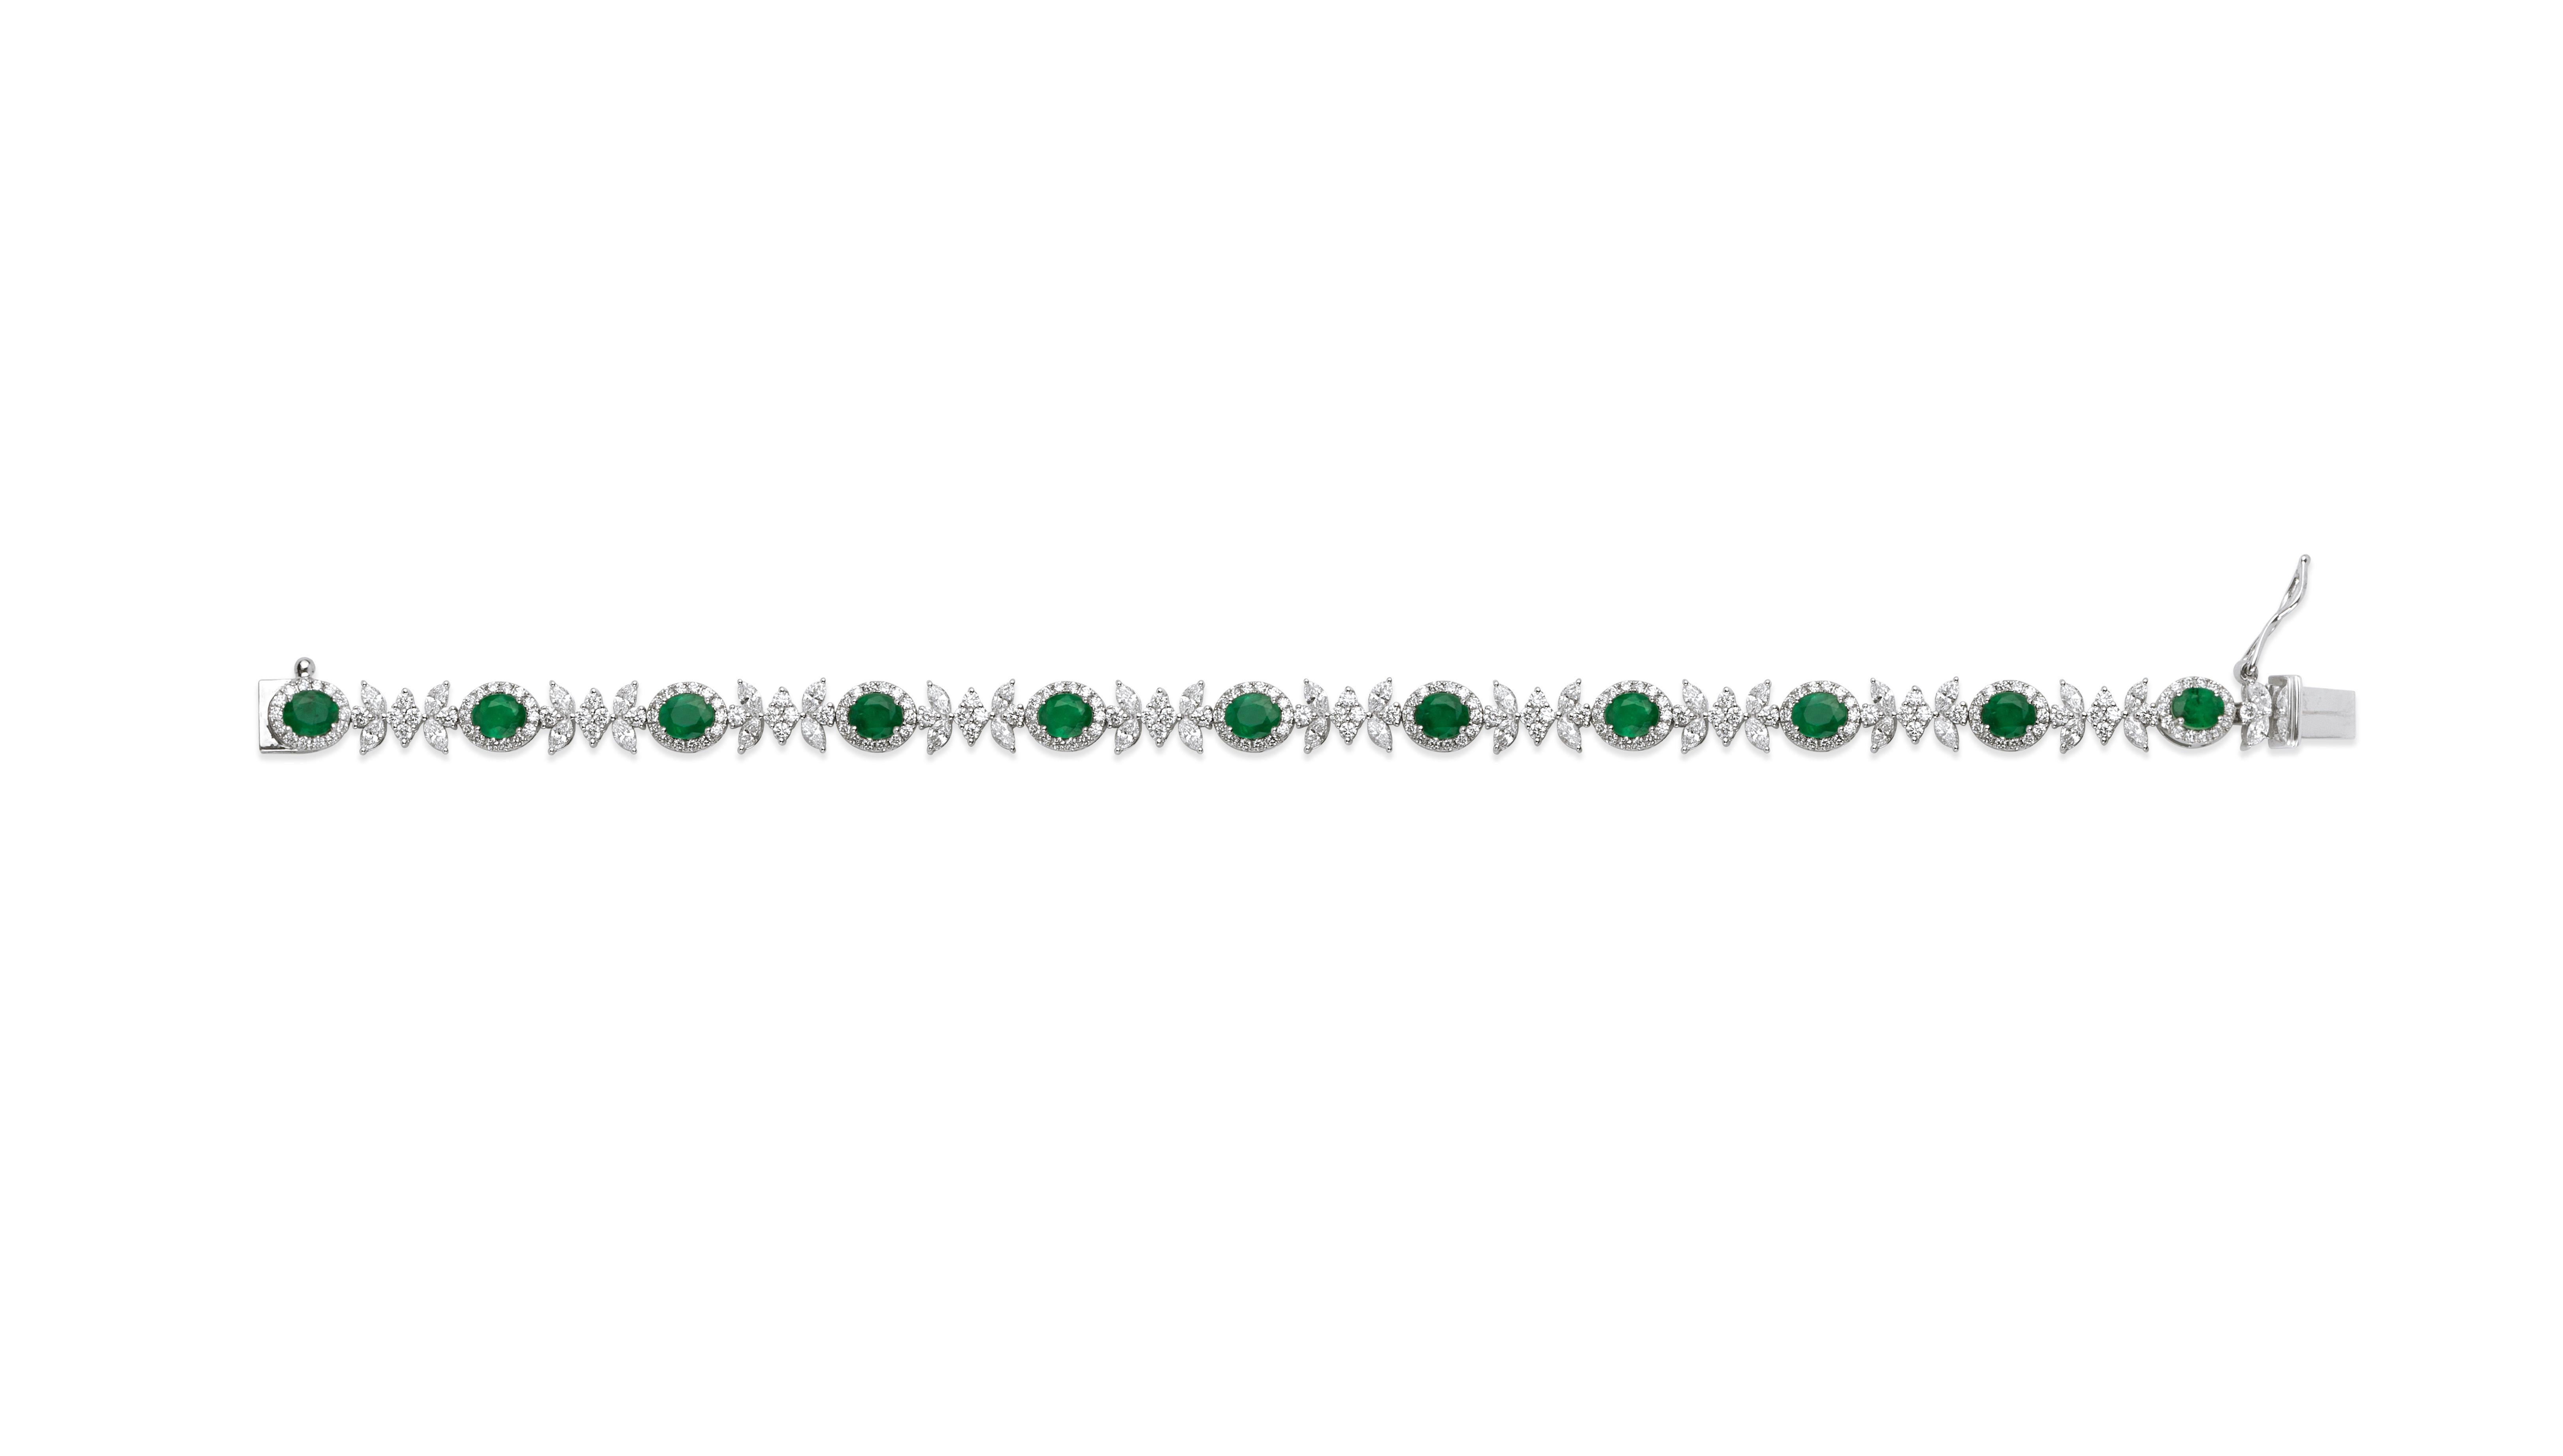 Exceptional 4.5 Ct Oval Cut Natural Emerald Bracelet with diamond 18k White Gold

✤ 𝐃𝐞𝐭𝐚𝐢𝐥𝐬
↦ Emerald : 4.5 carats
✤ Diamond
↦ Color: F G
↦ Clarity: VS 
↦ Carat Weight: 3.6 TCW
↦ Making Process: Handmade - Crafted by our experienced team
↦